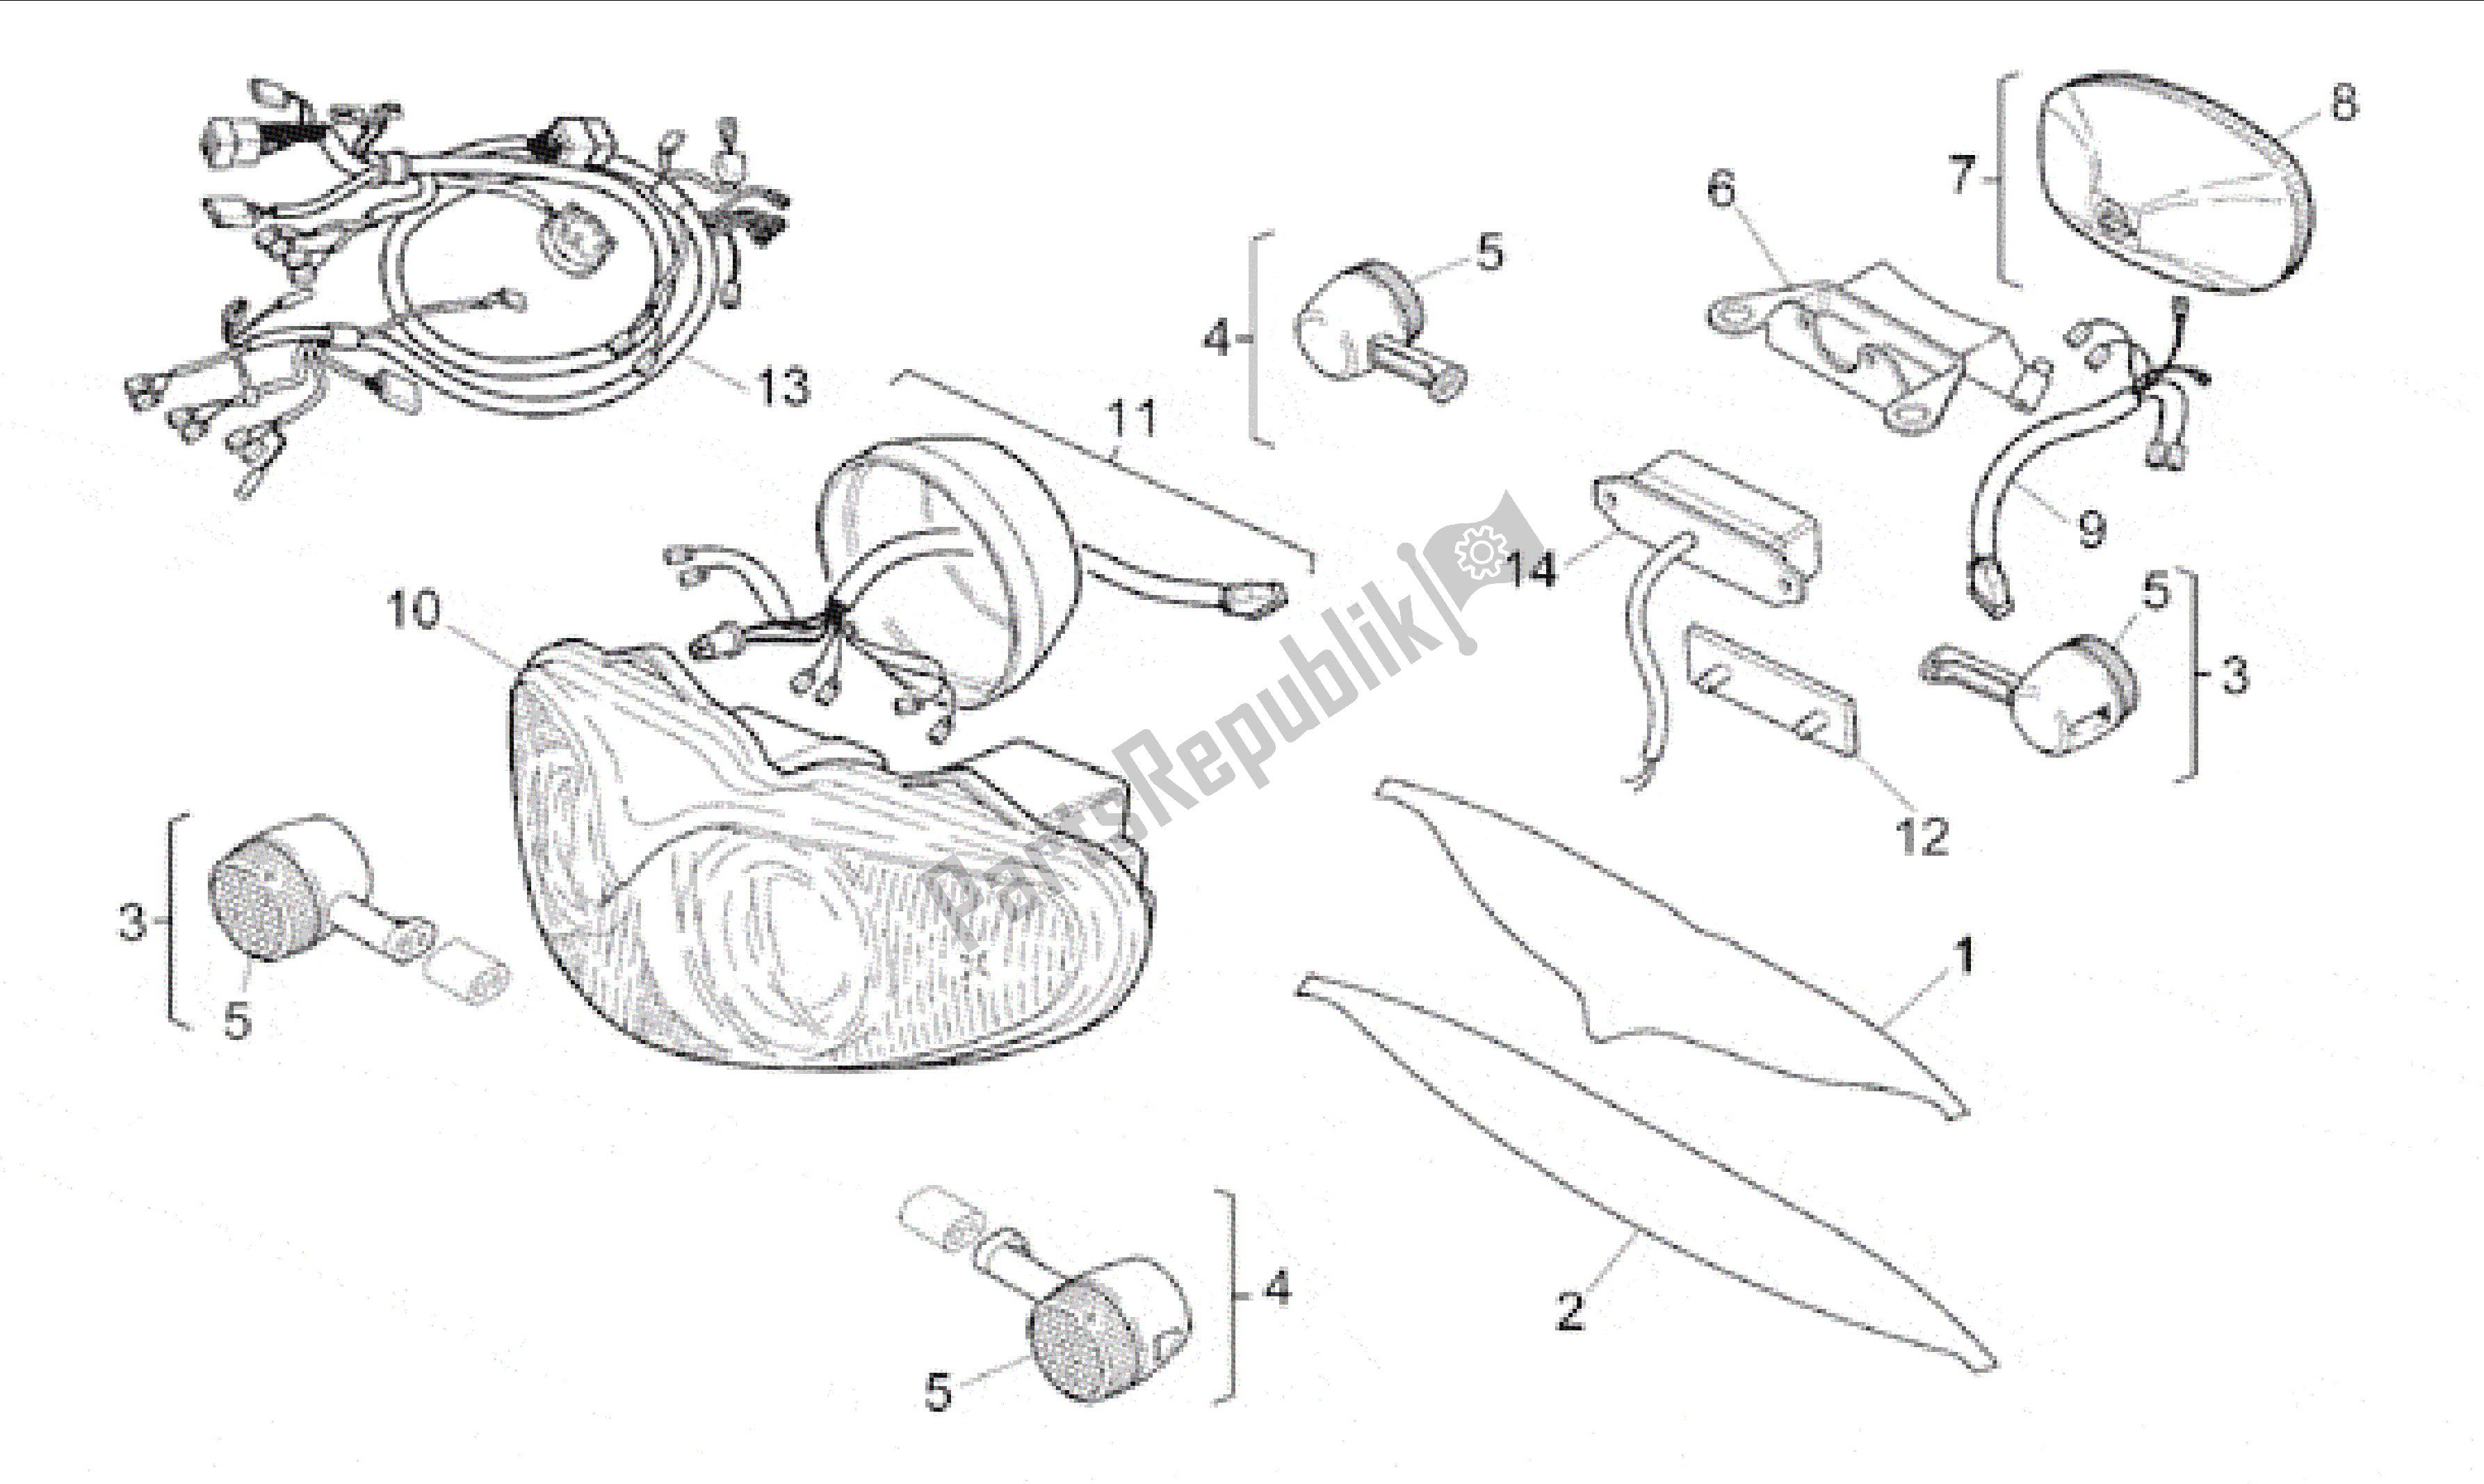 All parts for the Lights of the Aprilia RS 250 1995 - 1997